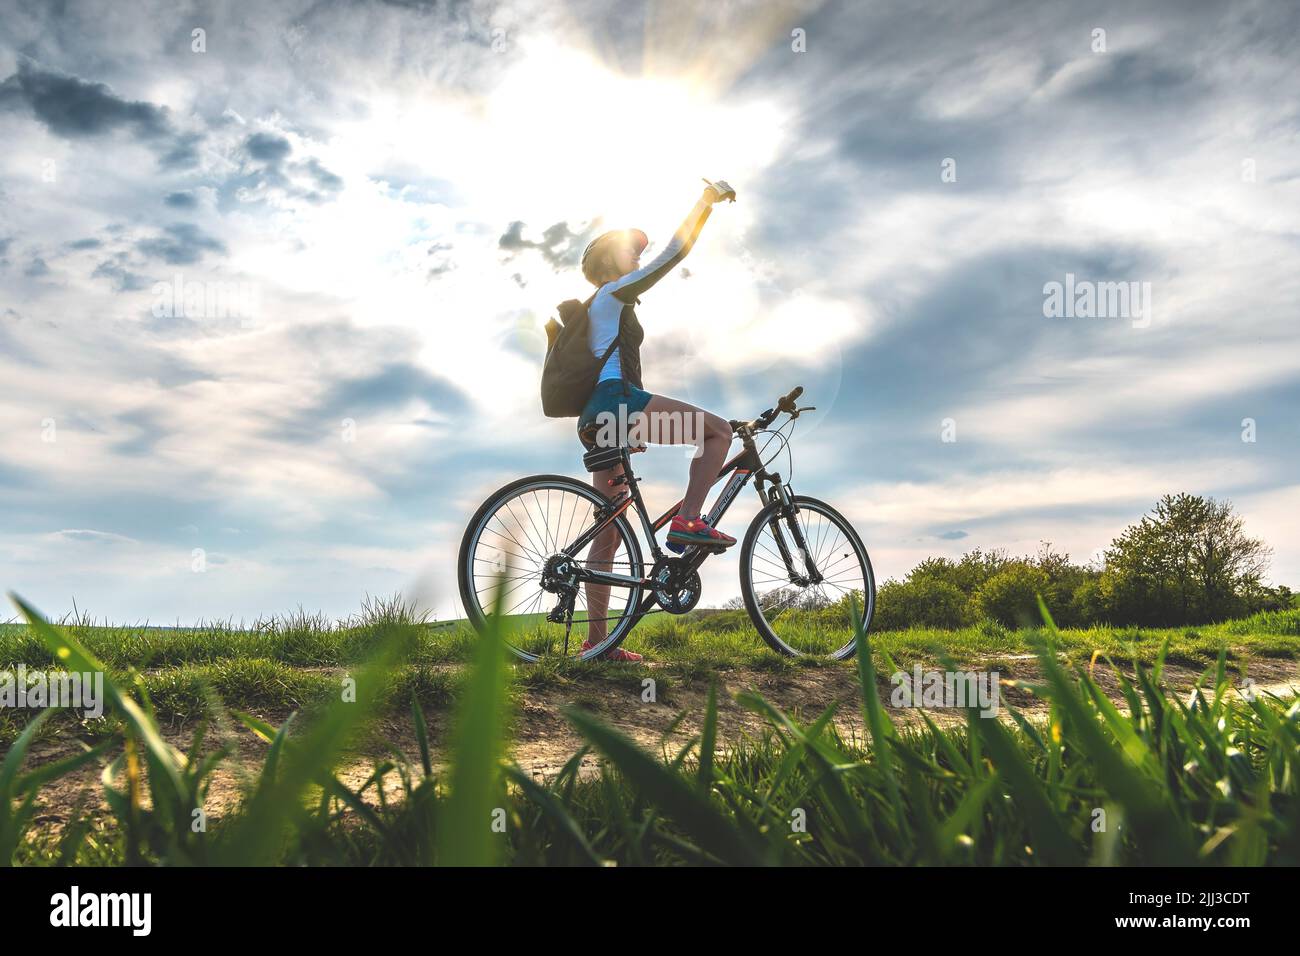 Silhouette of a woman on a bicycle holding a phone. Searching for a telephone signal. Lost cyclist. Smartphone navigation and map applications. Stock Photo